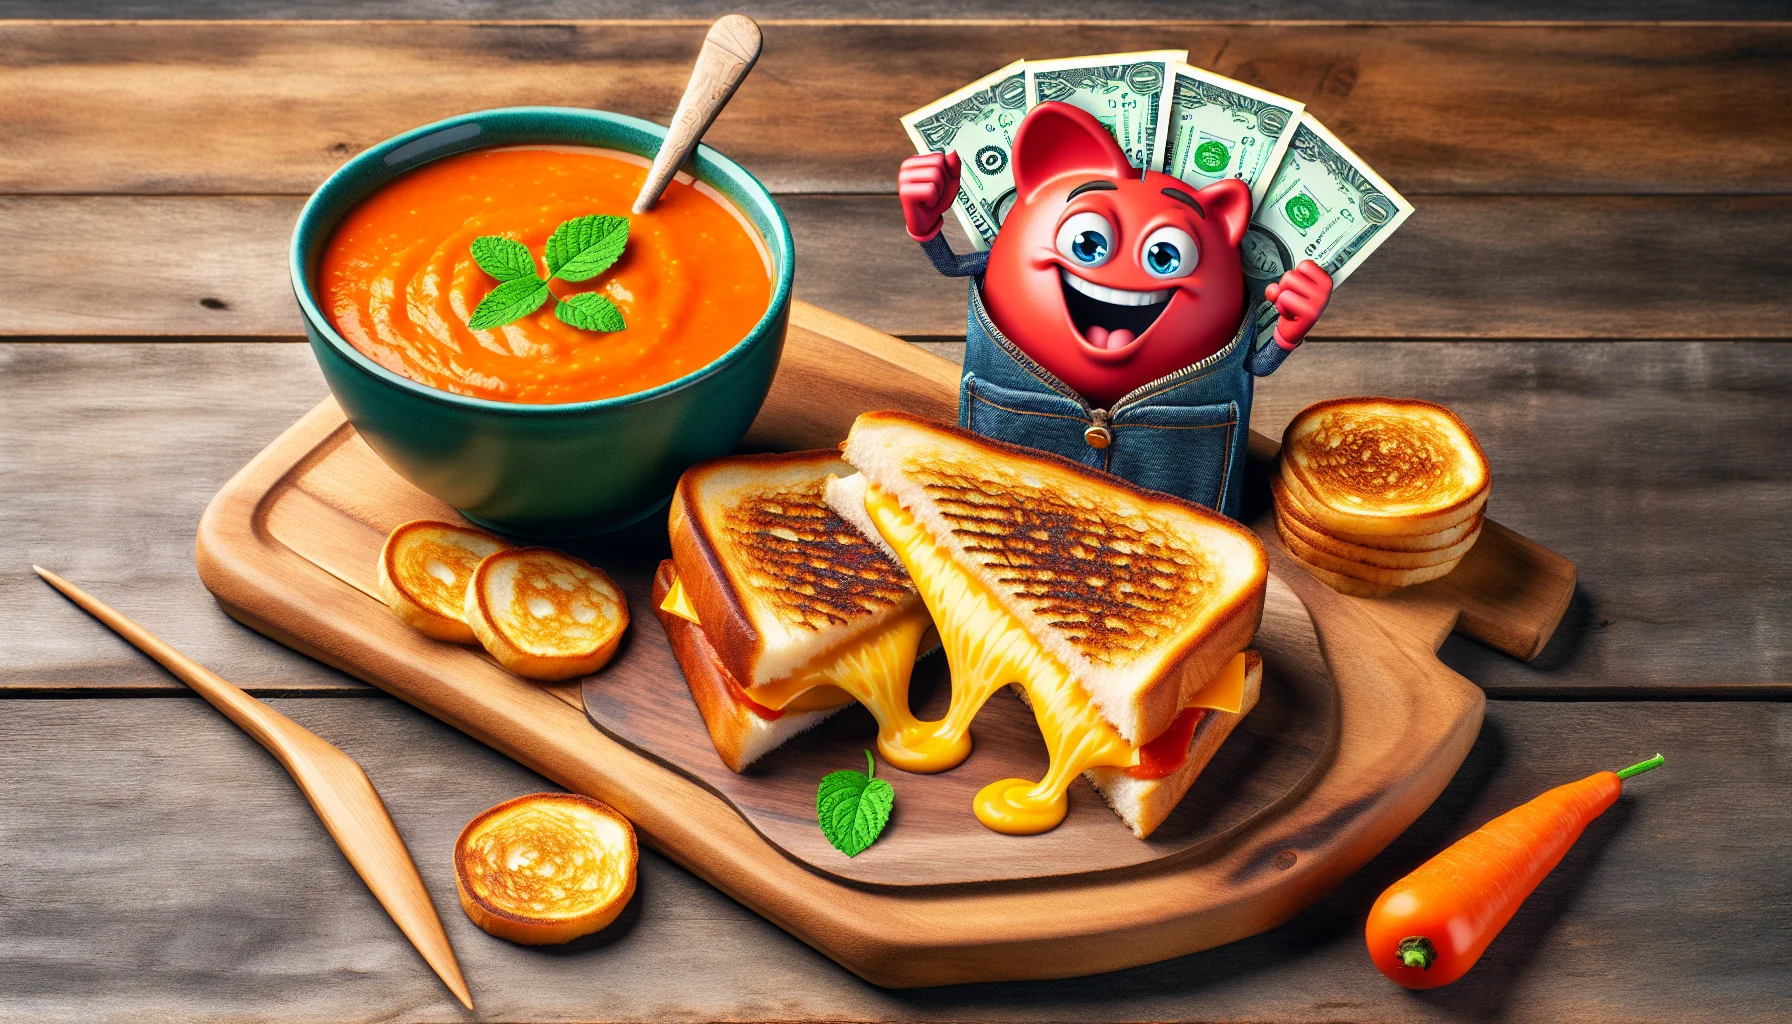 Create a comedic and lively image of a money-saving meal that's appetizing and good for your health. Picture a succulent, golden-brown grilled cheese sandwich filled with melting cheese, sitting next to a bowl of fresh tomato soup that's bubbling gently. Perhaps there's a caricature of a happy wallet, exclaiming how much money it has saved, and a smiling heart symbolizing health benefits. All the elements are placed on a rustic wooden table, creating a warm and inviting scene. This humorous portrayal of an affordable, health-conscious eating strategy should make viewers hungry to try the dish.